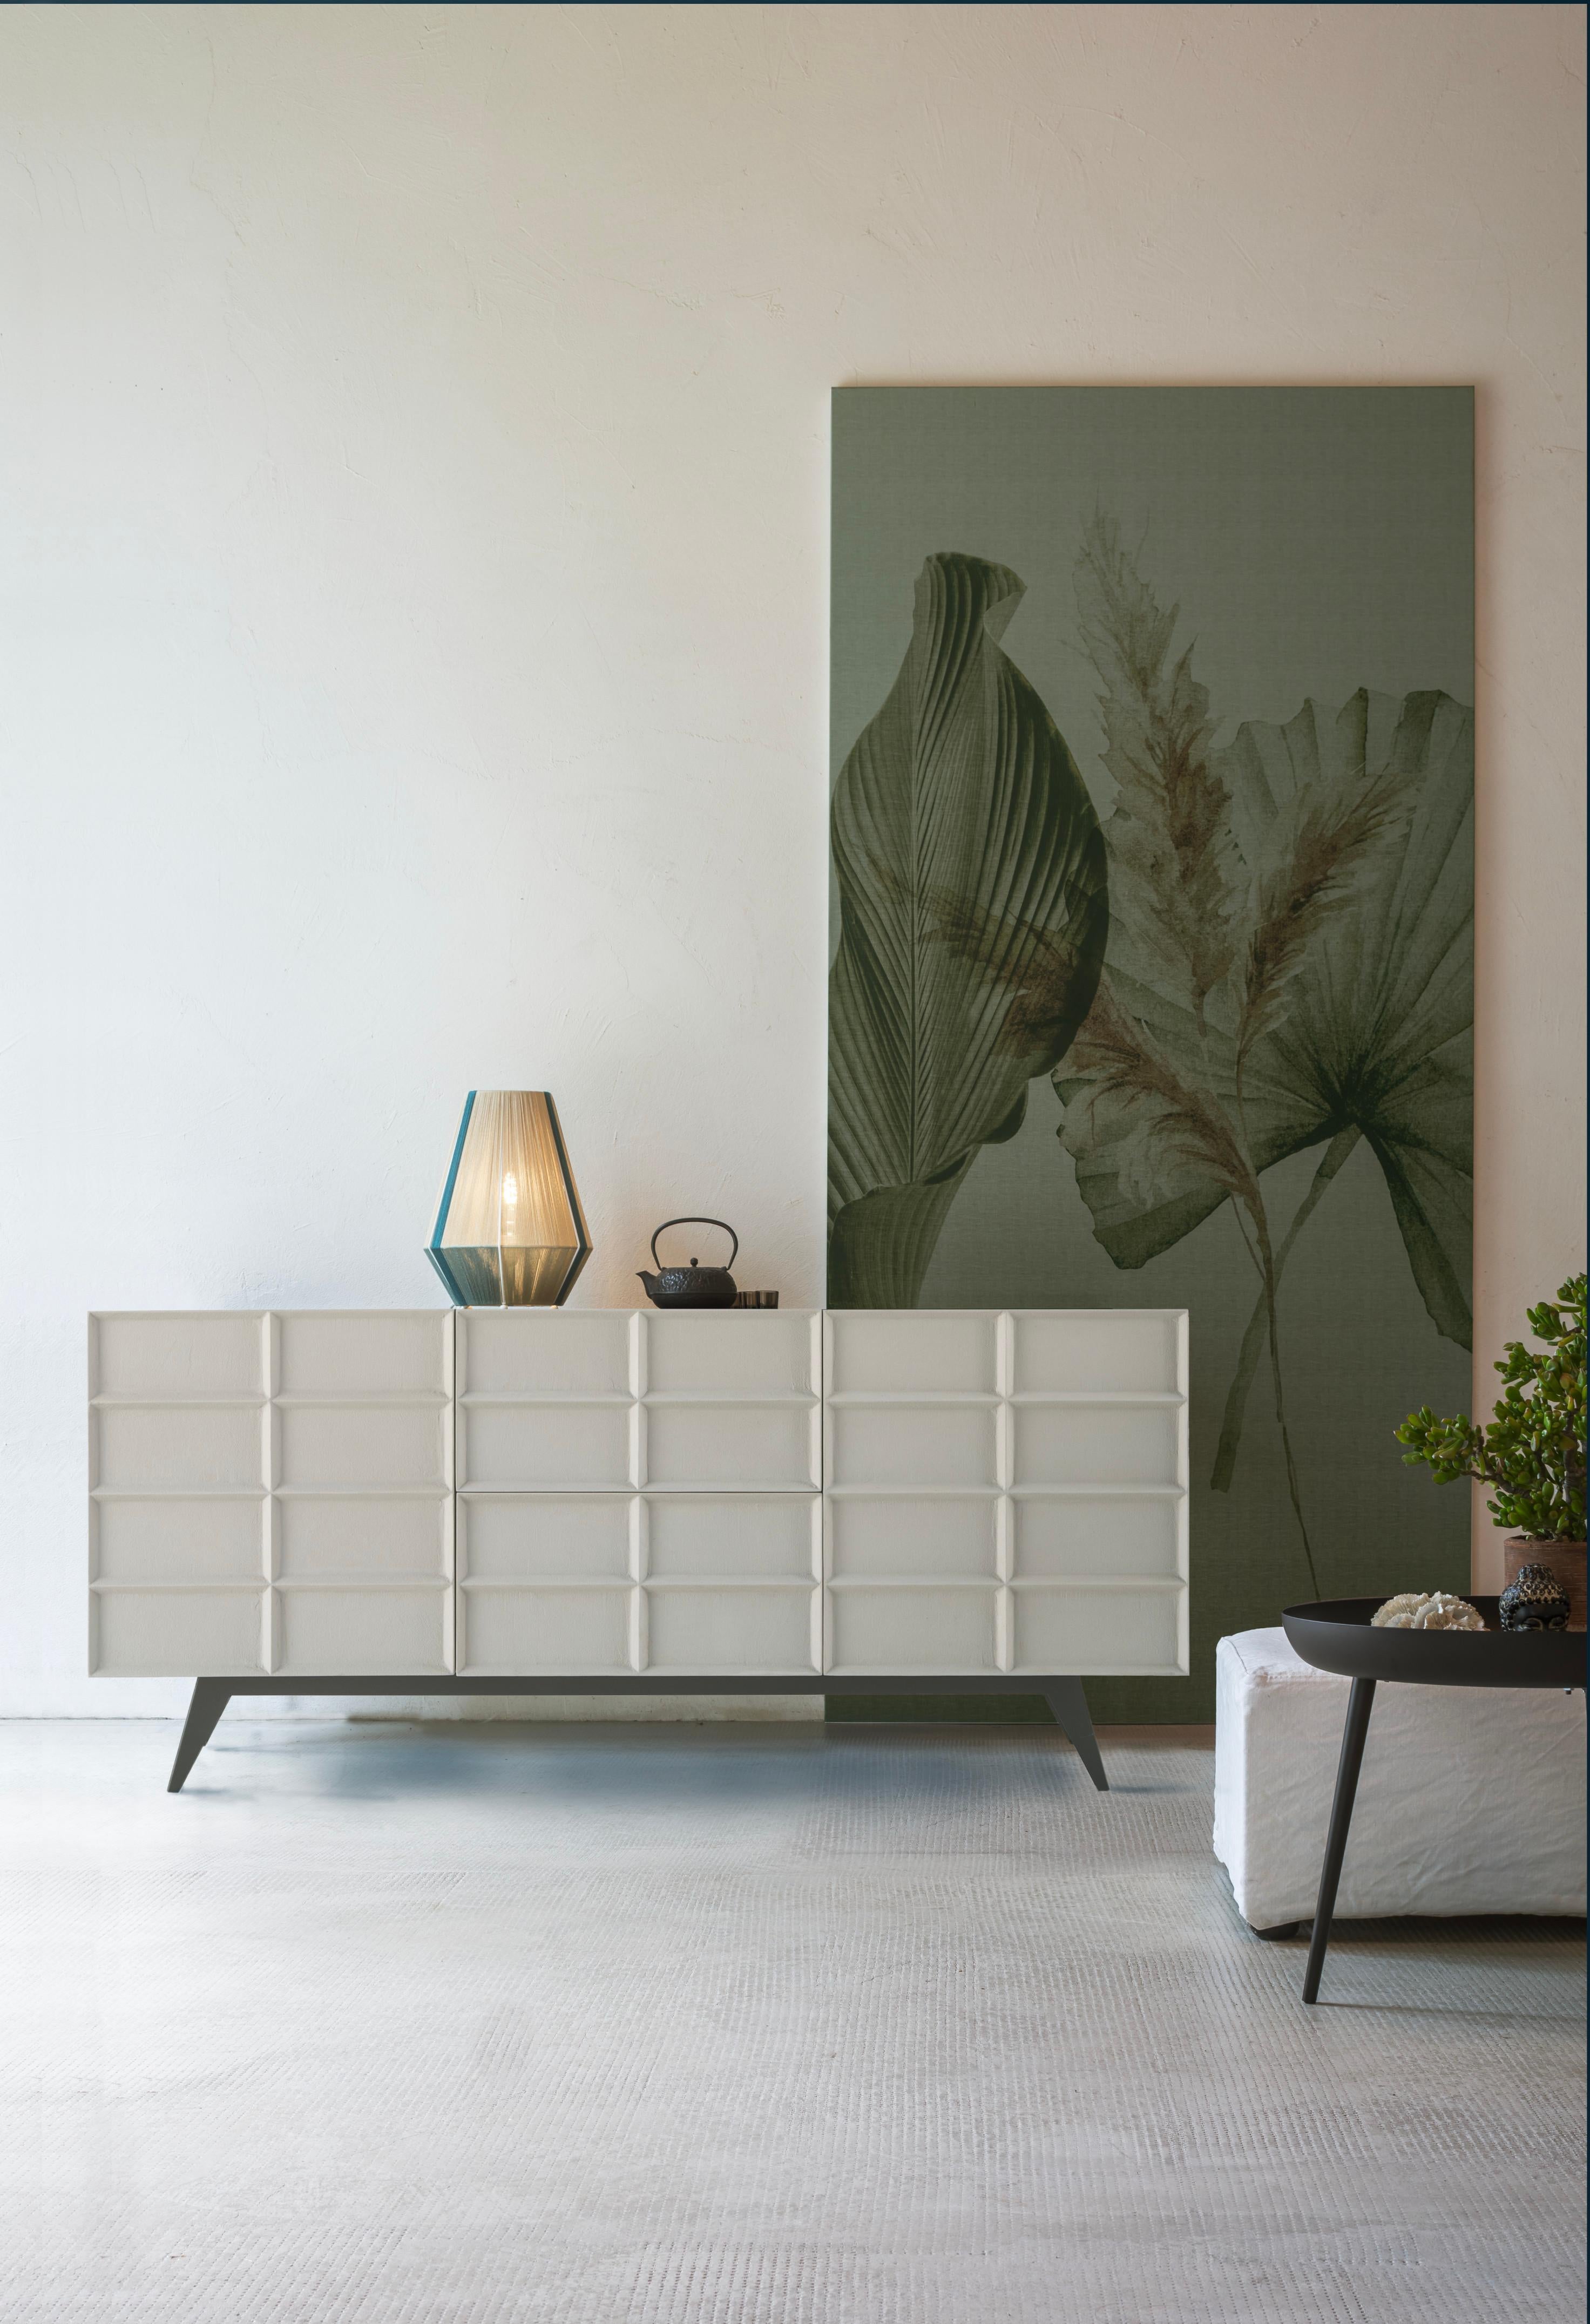 Inspired by a chocolate bar, coco is characterized by its rigorous and elegant lines. Its unique shape allowed us to explore numerous different opening mechanisms, alternating doors and drawers while keeping the overall look the same.
Sideboard W.